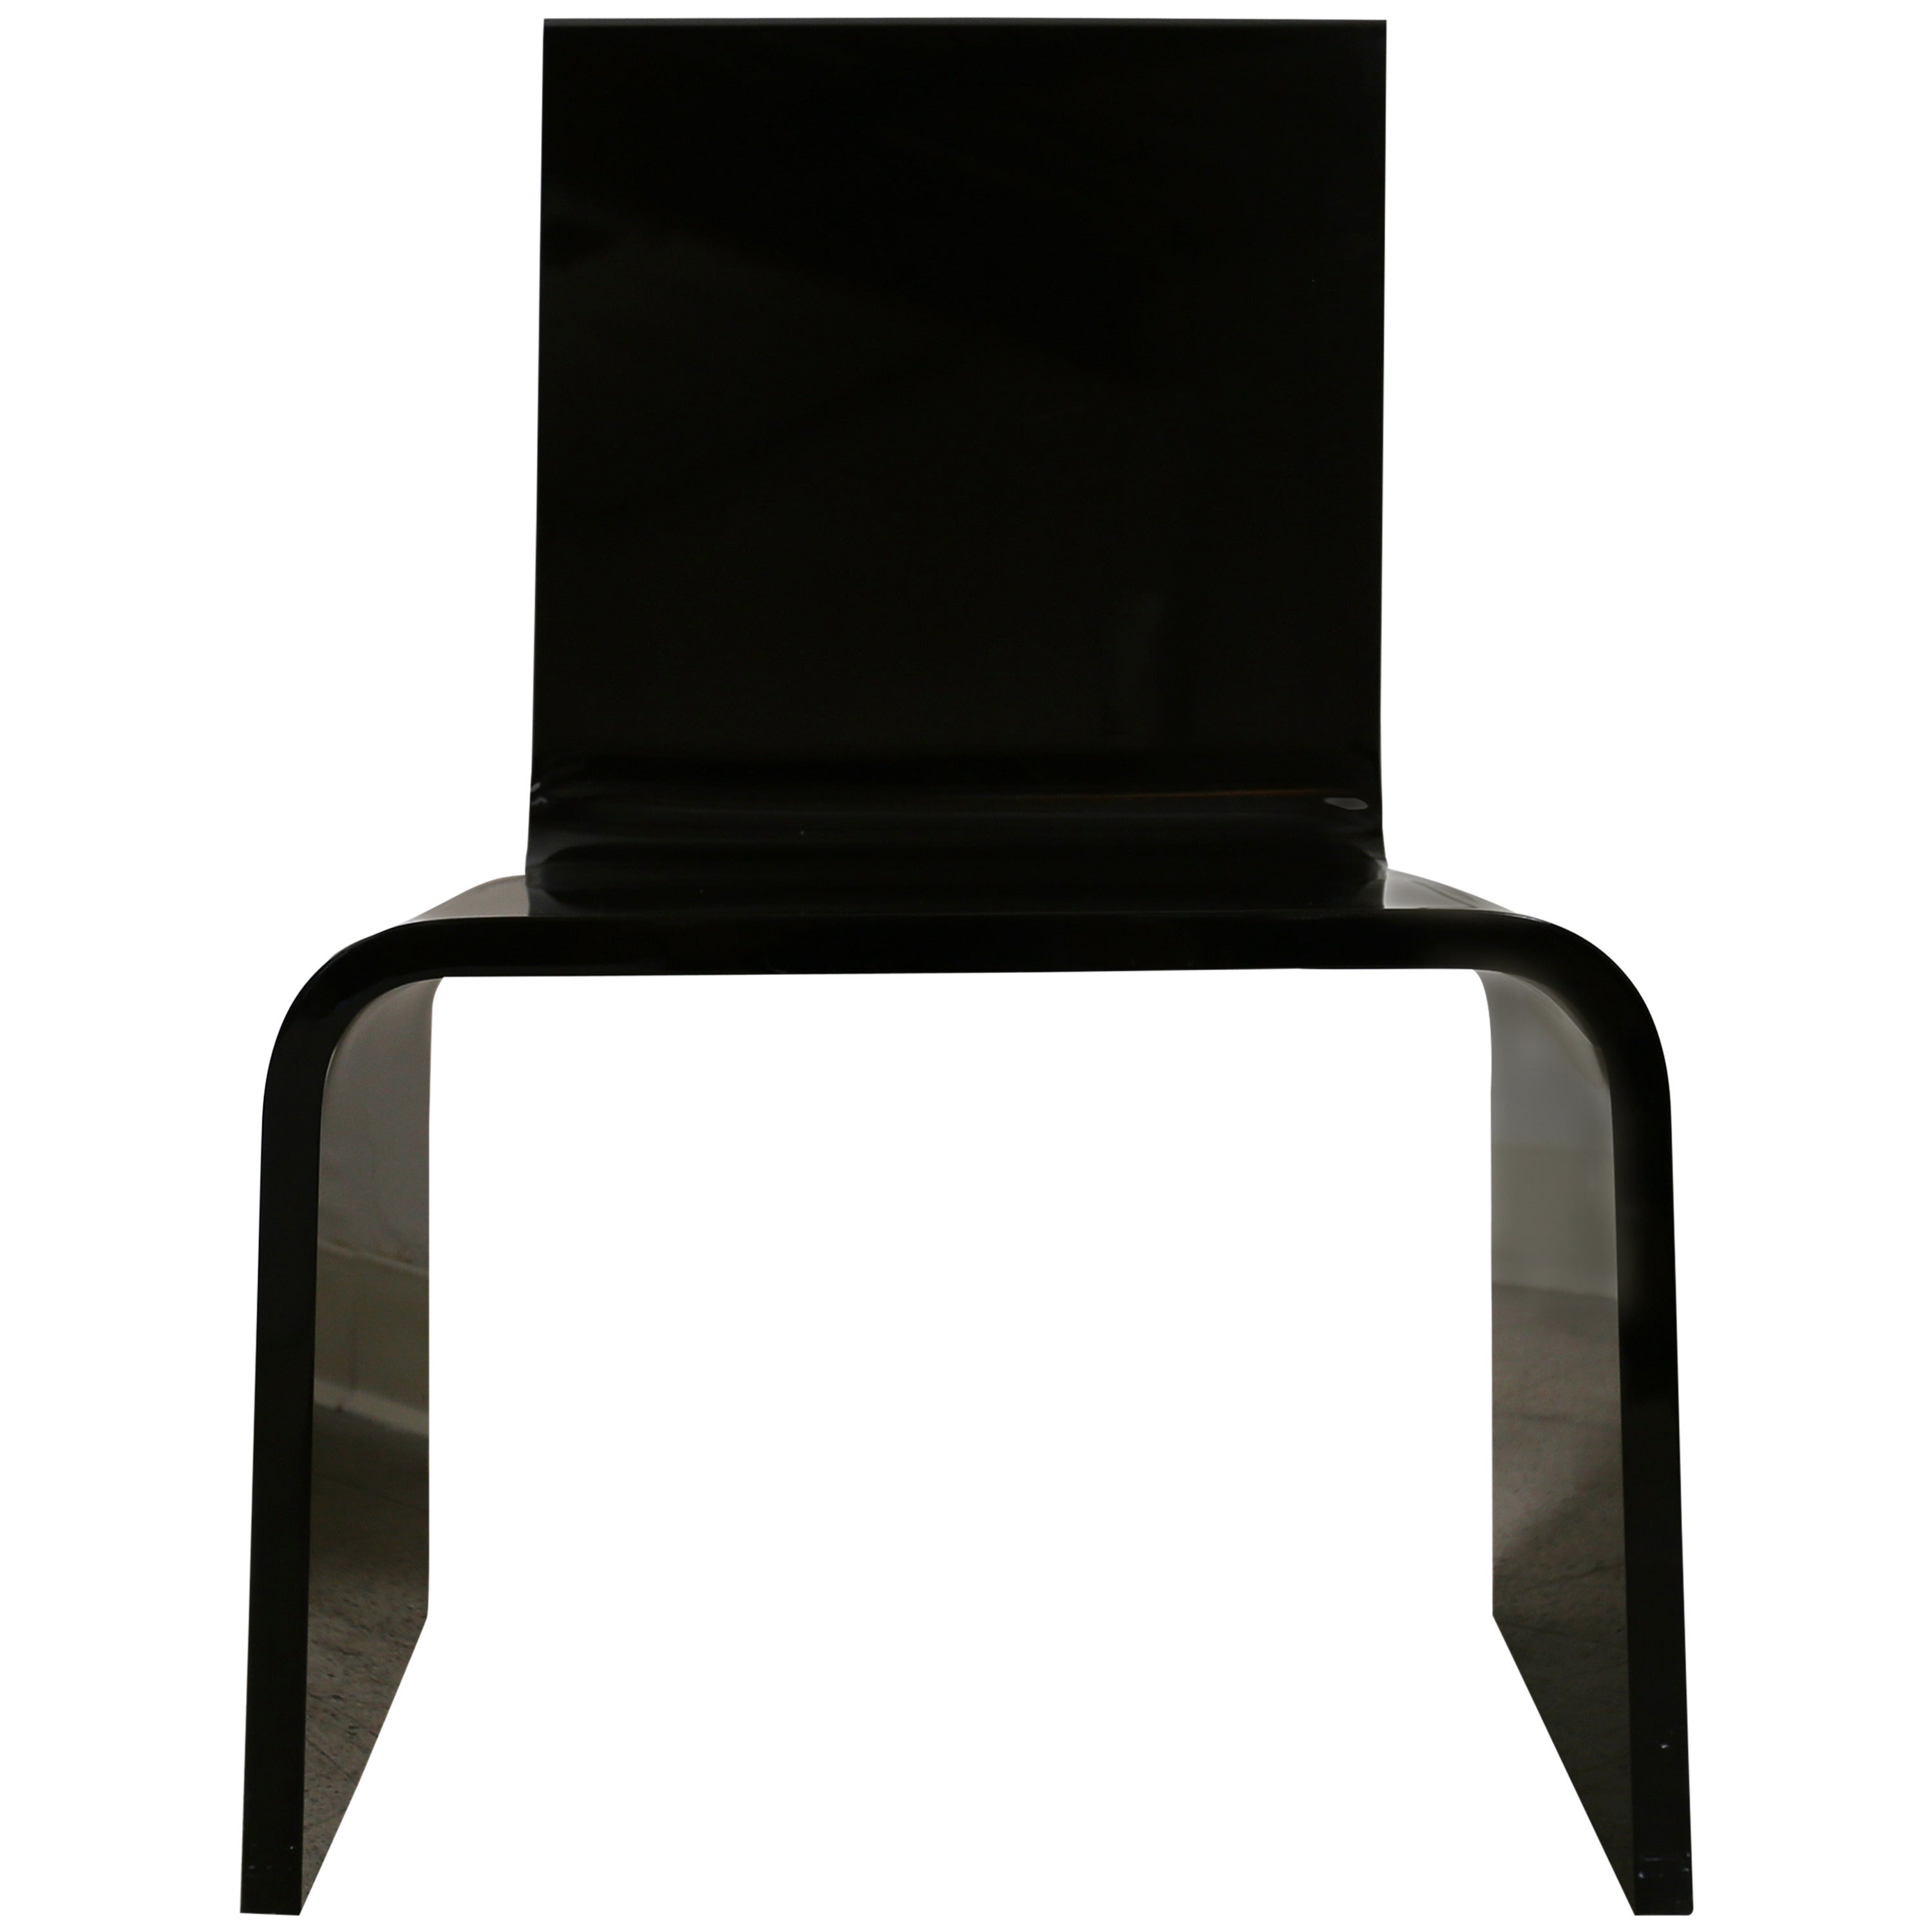 "Black Form Chair" by Aaron R. Thomas